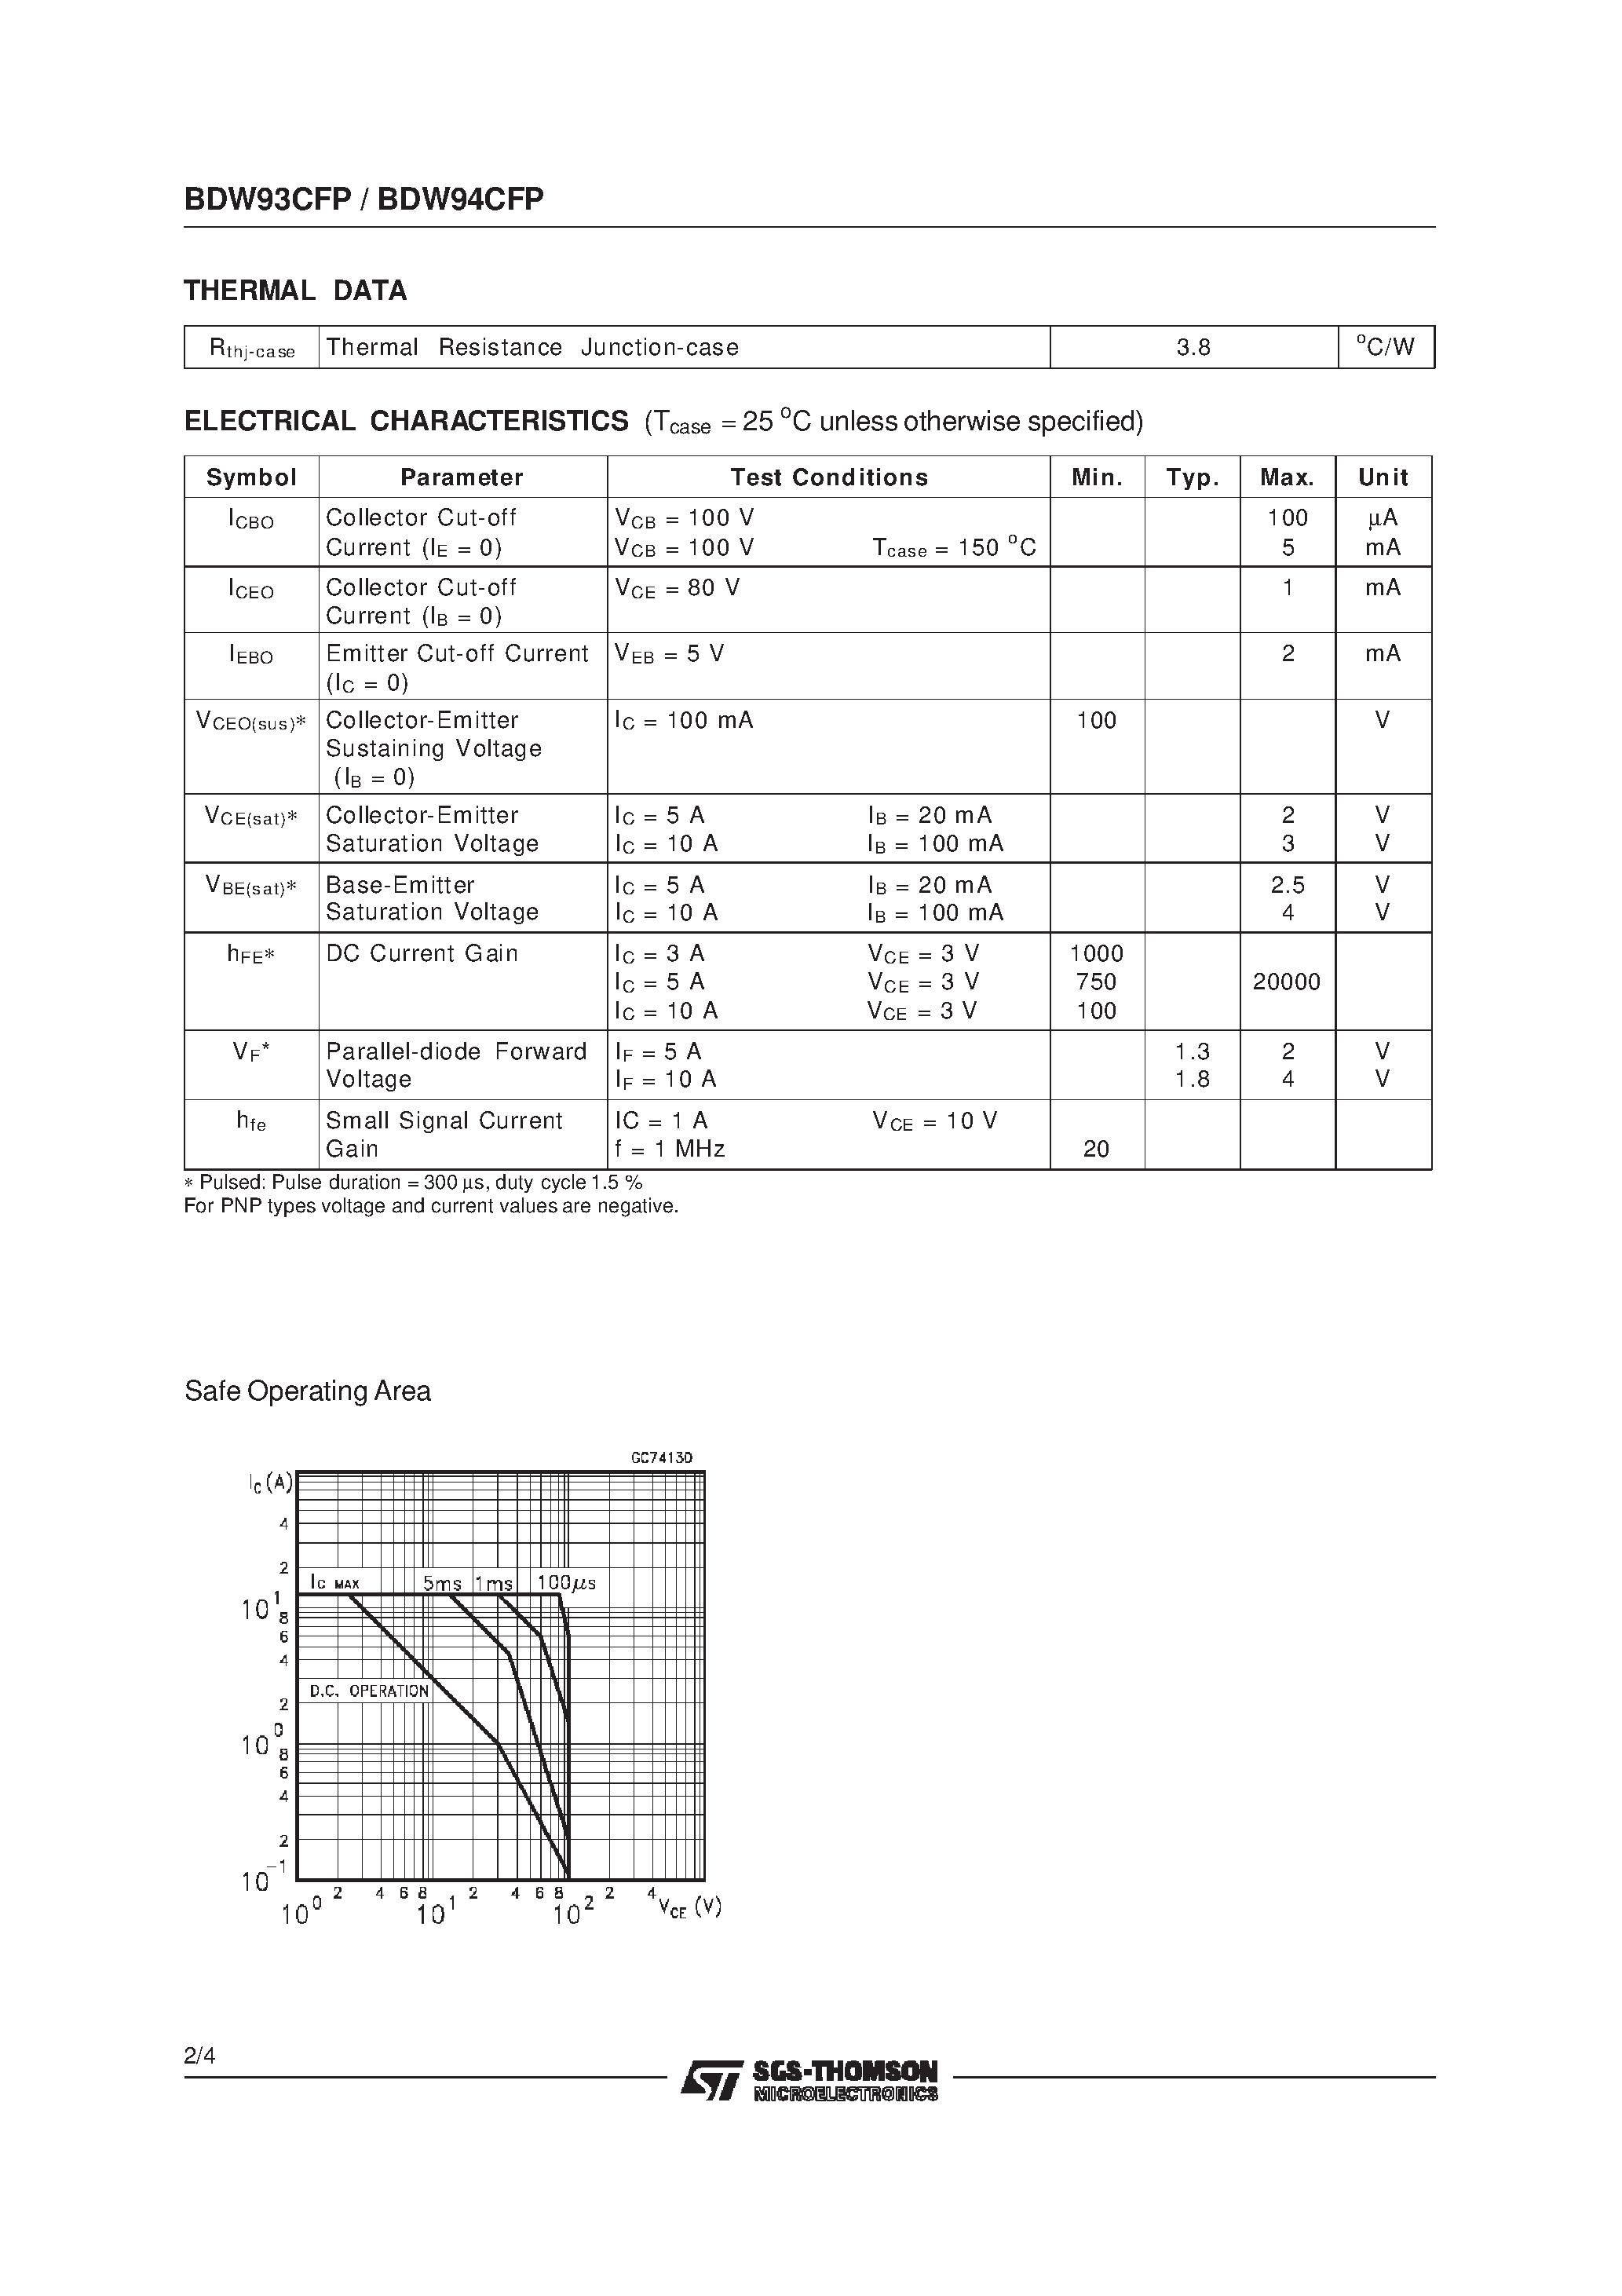 Datasheet BDW93CFP - COMPLEMENTARY SILICON POWER DARLINGTON TRANSISTORS page 2